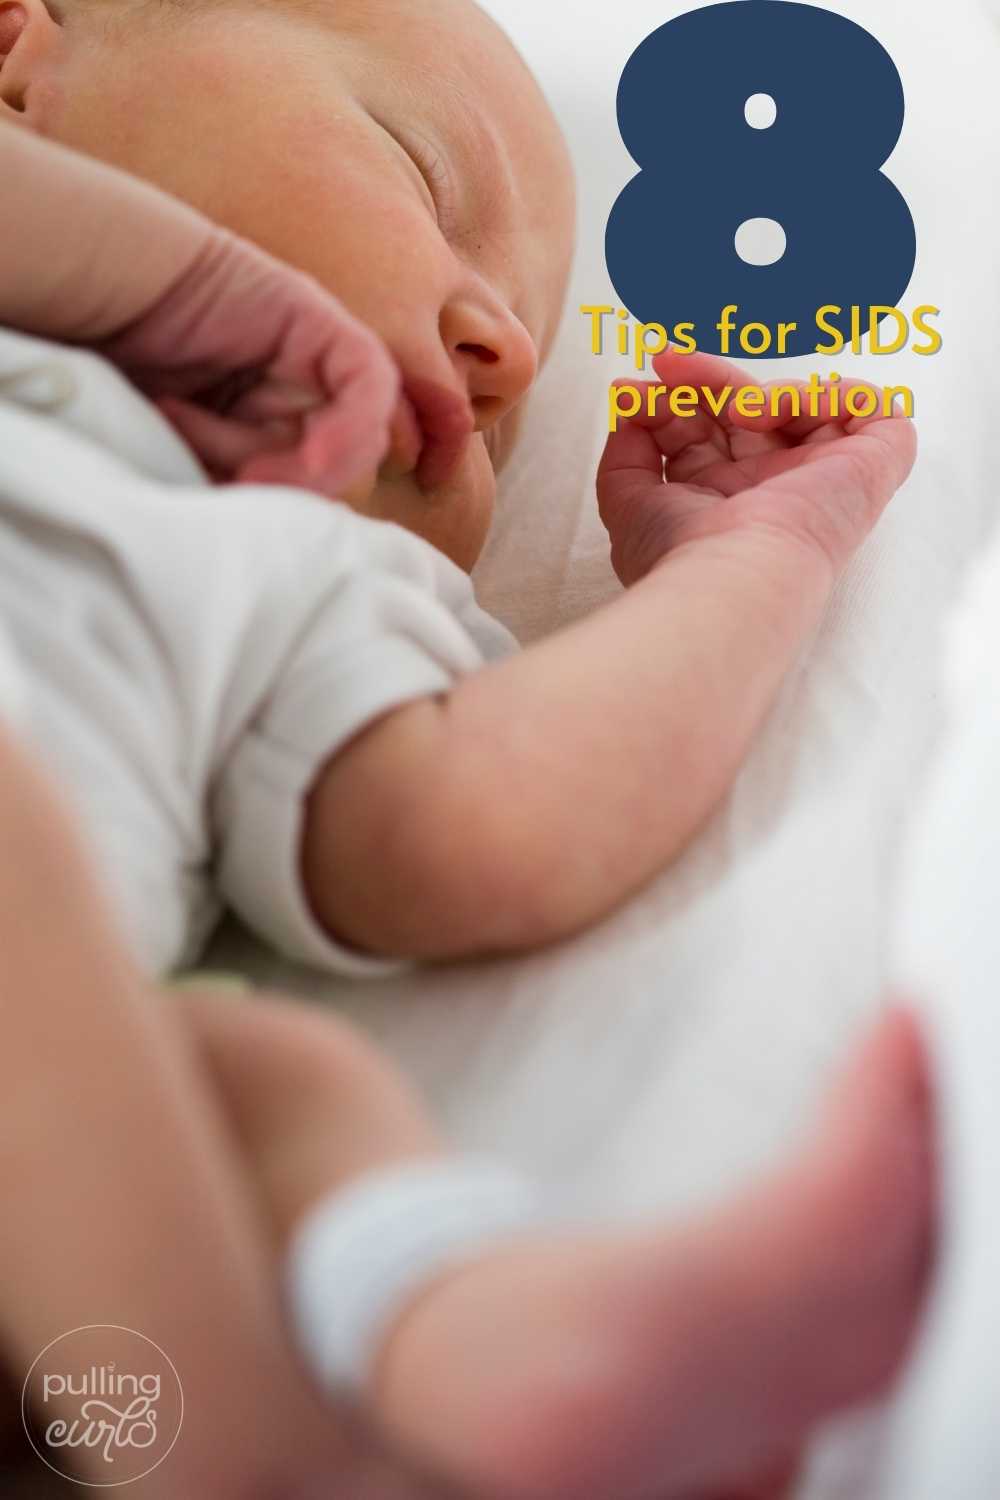 Sids prevention (although you can't prevent something you don't understand) awareness, risk by age, #babies #baby #sids via @pullingcurls